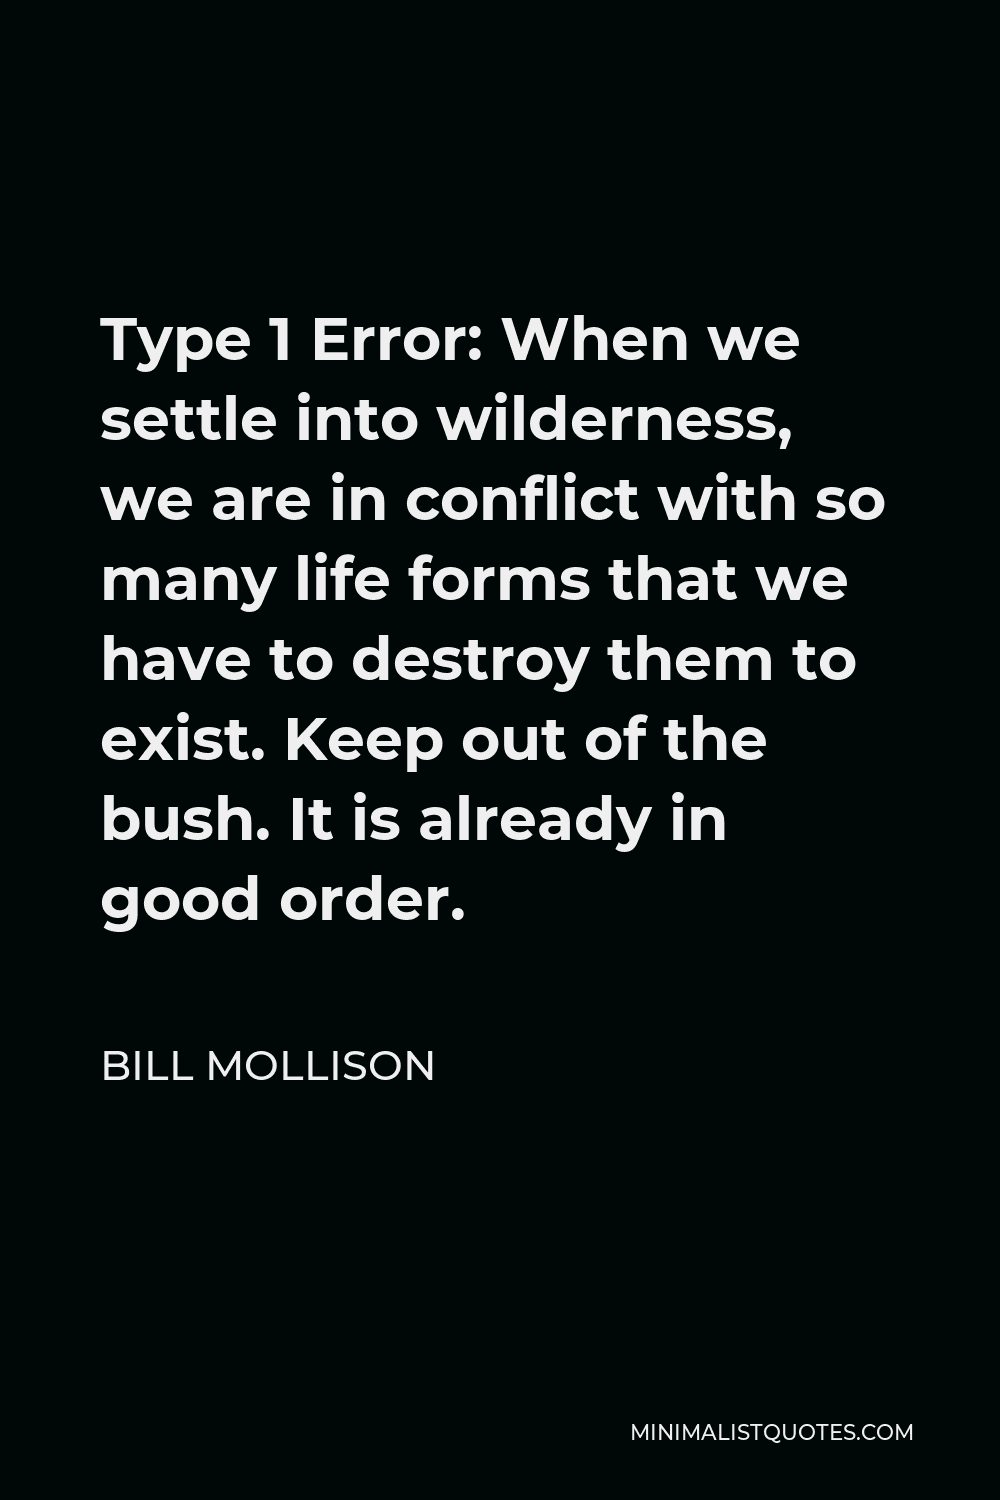 Bill Mollison Quote - Type 1 Error: When we settle into wilderness, we are in conflict with so many life forms that we have to destroy them to exist. Keep out of the bush. It is already in good order.